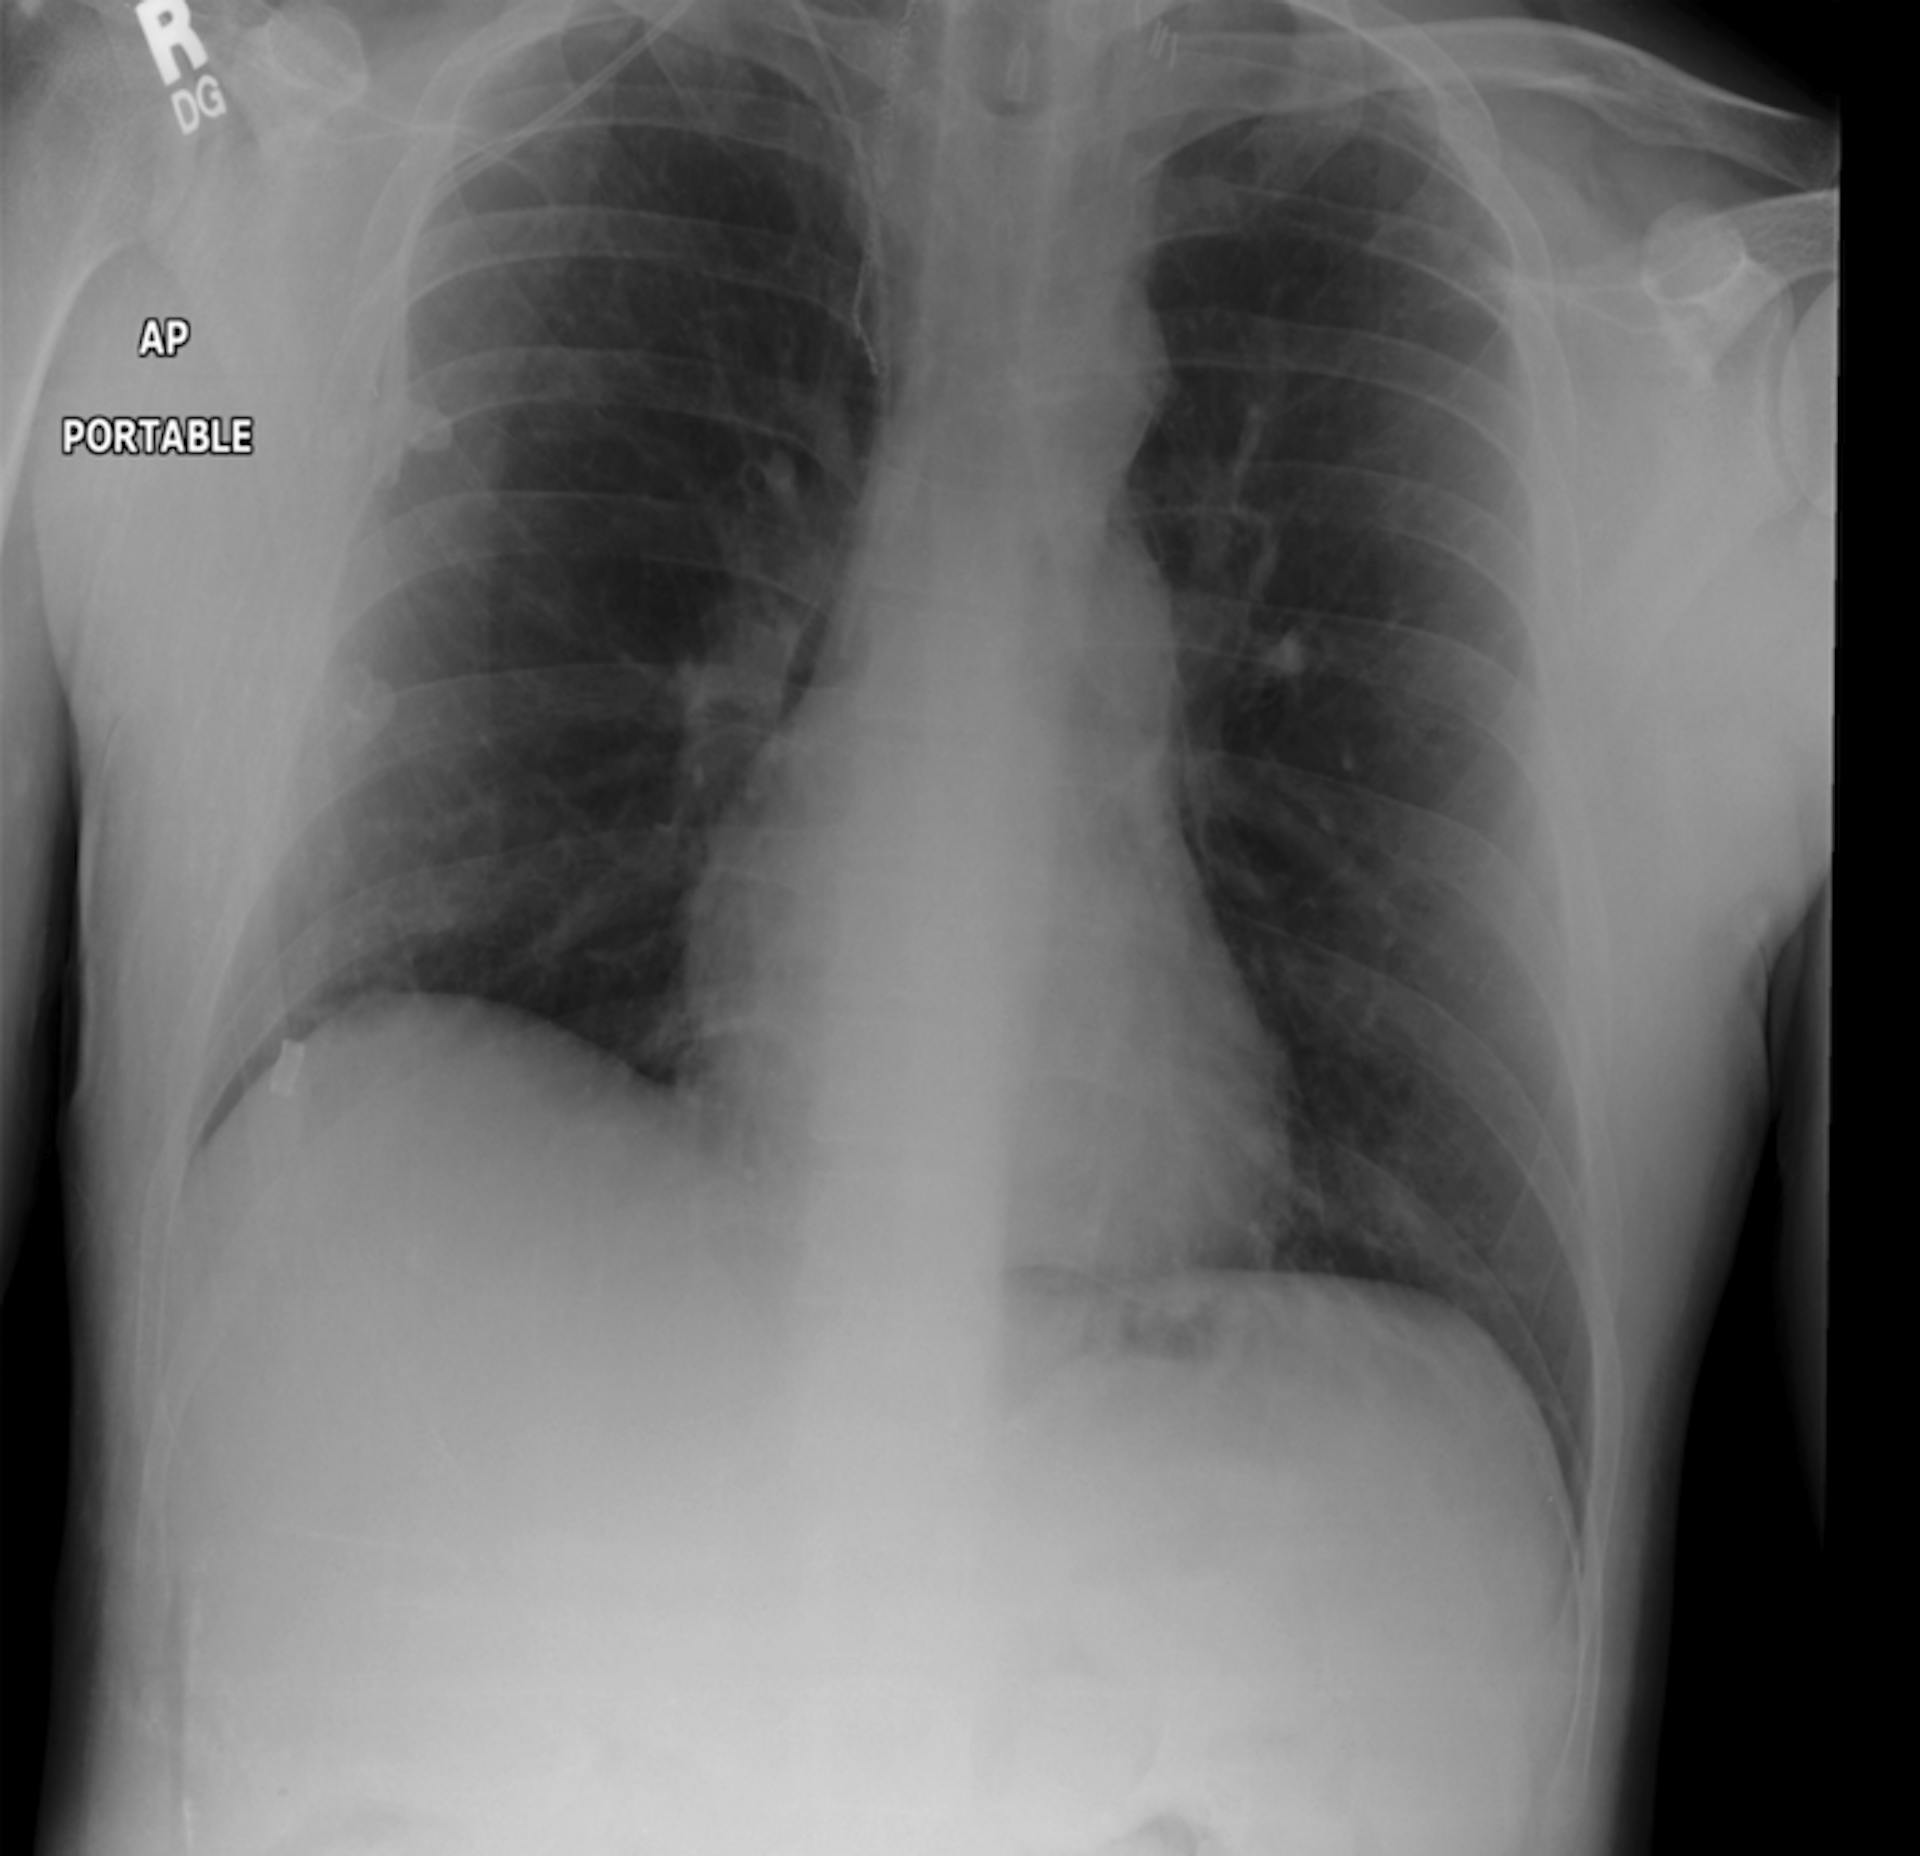 An example image from the chest X-ray dataset